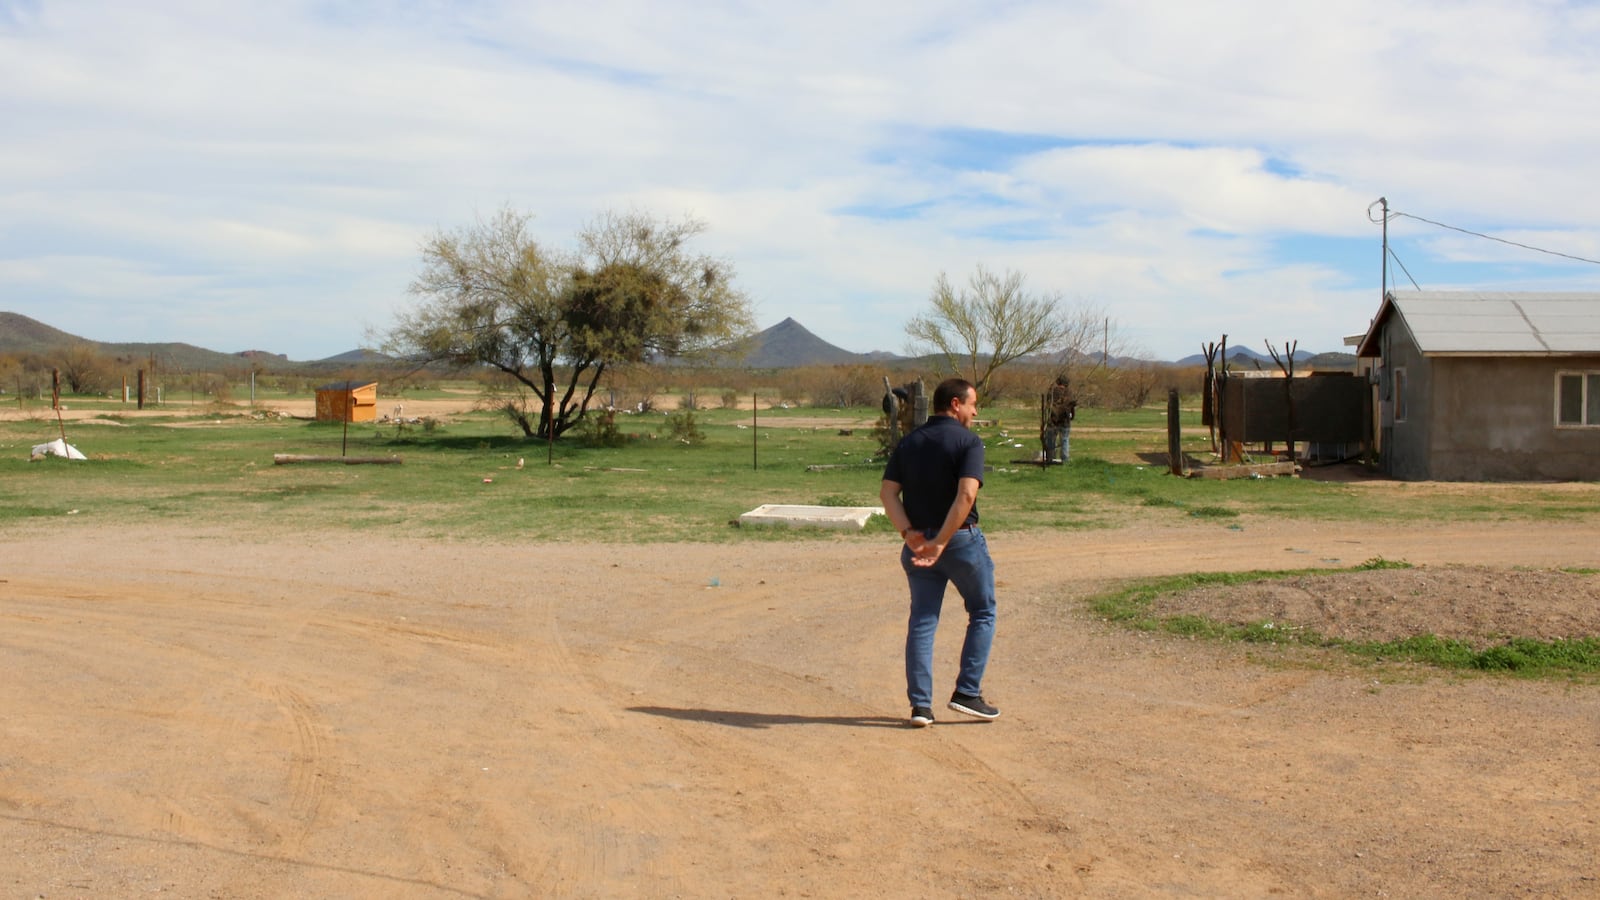 A person walks down a dirt road with a building to the right and a mountain and cloudy sky in the background.